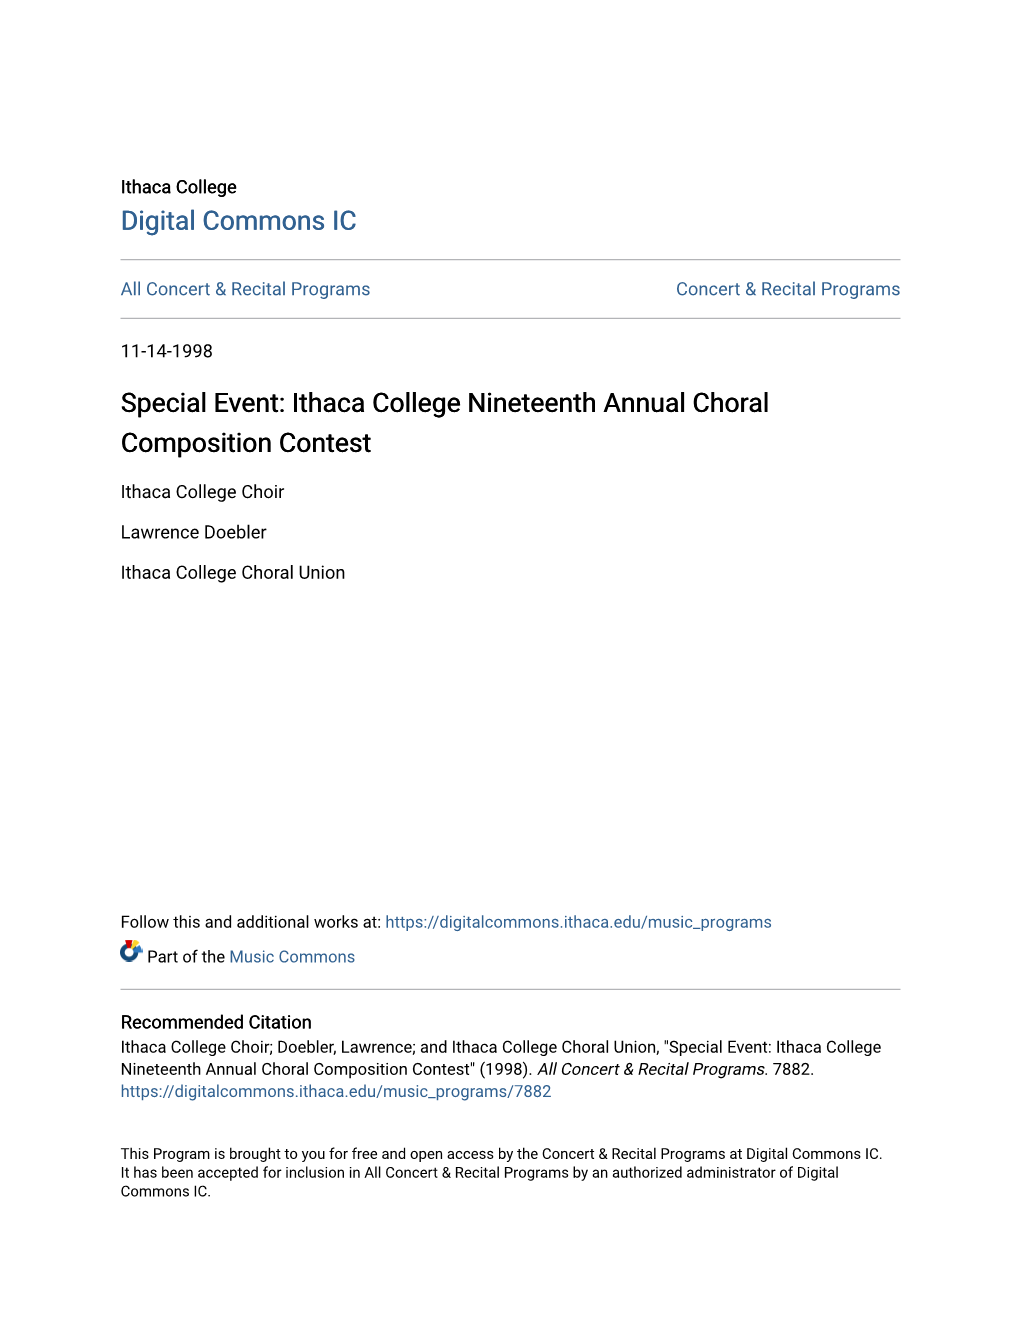 Ithaca College Nineteenth Annual Choral Composition Contest